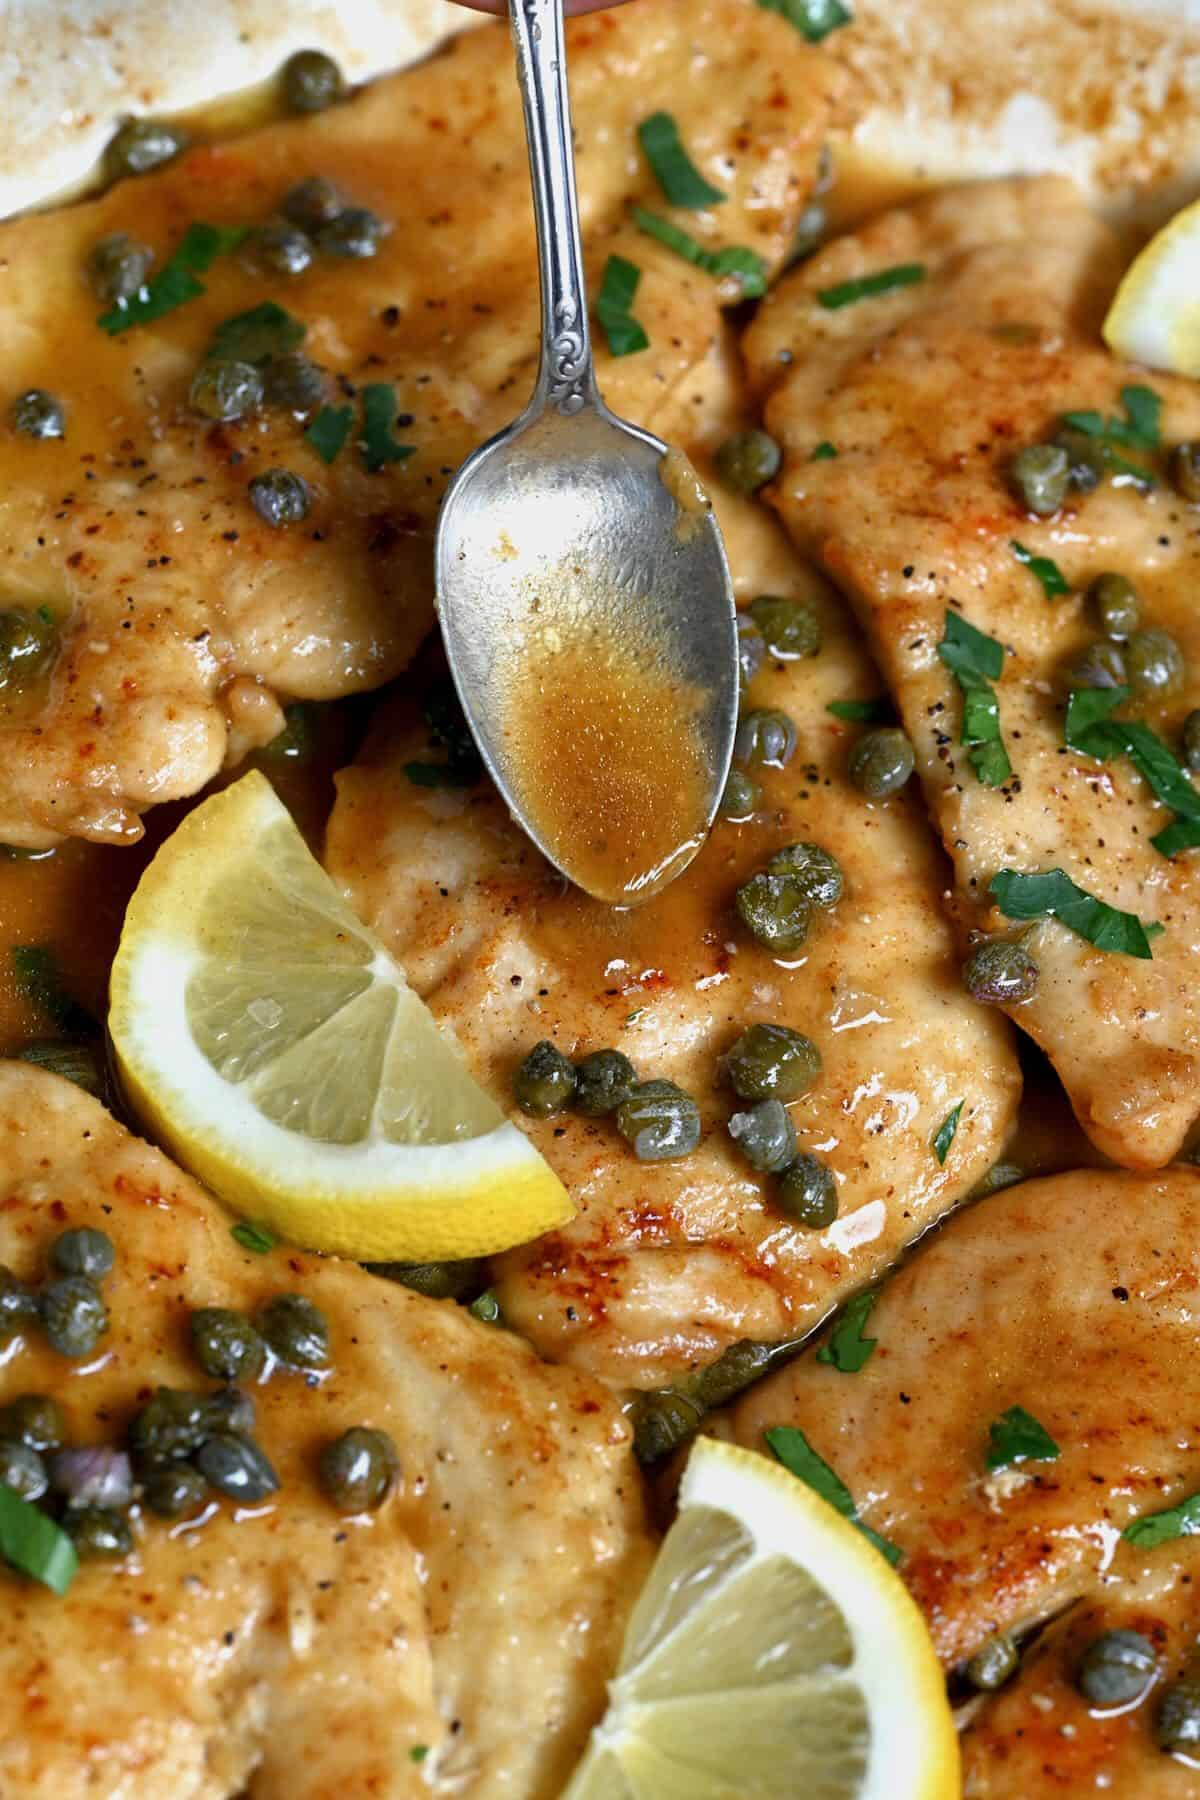 Pouring sauce over chicken piccata